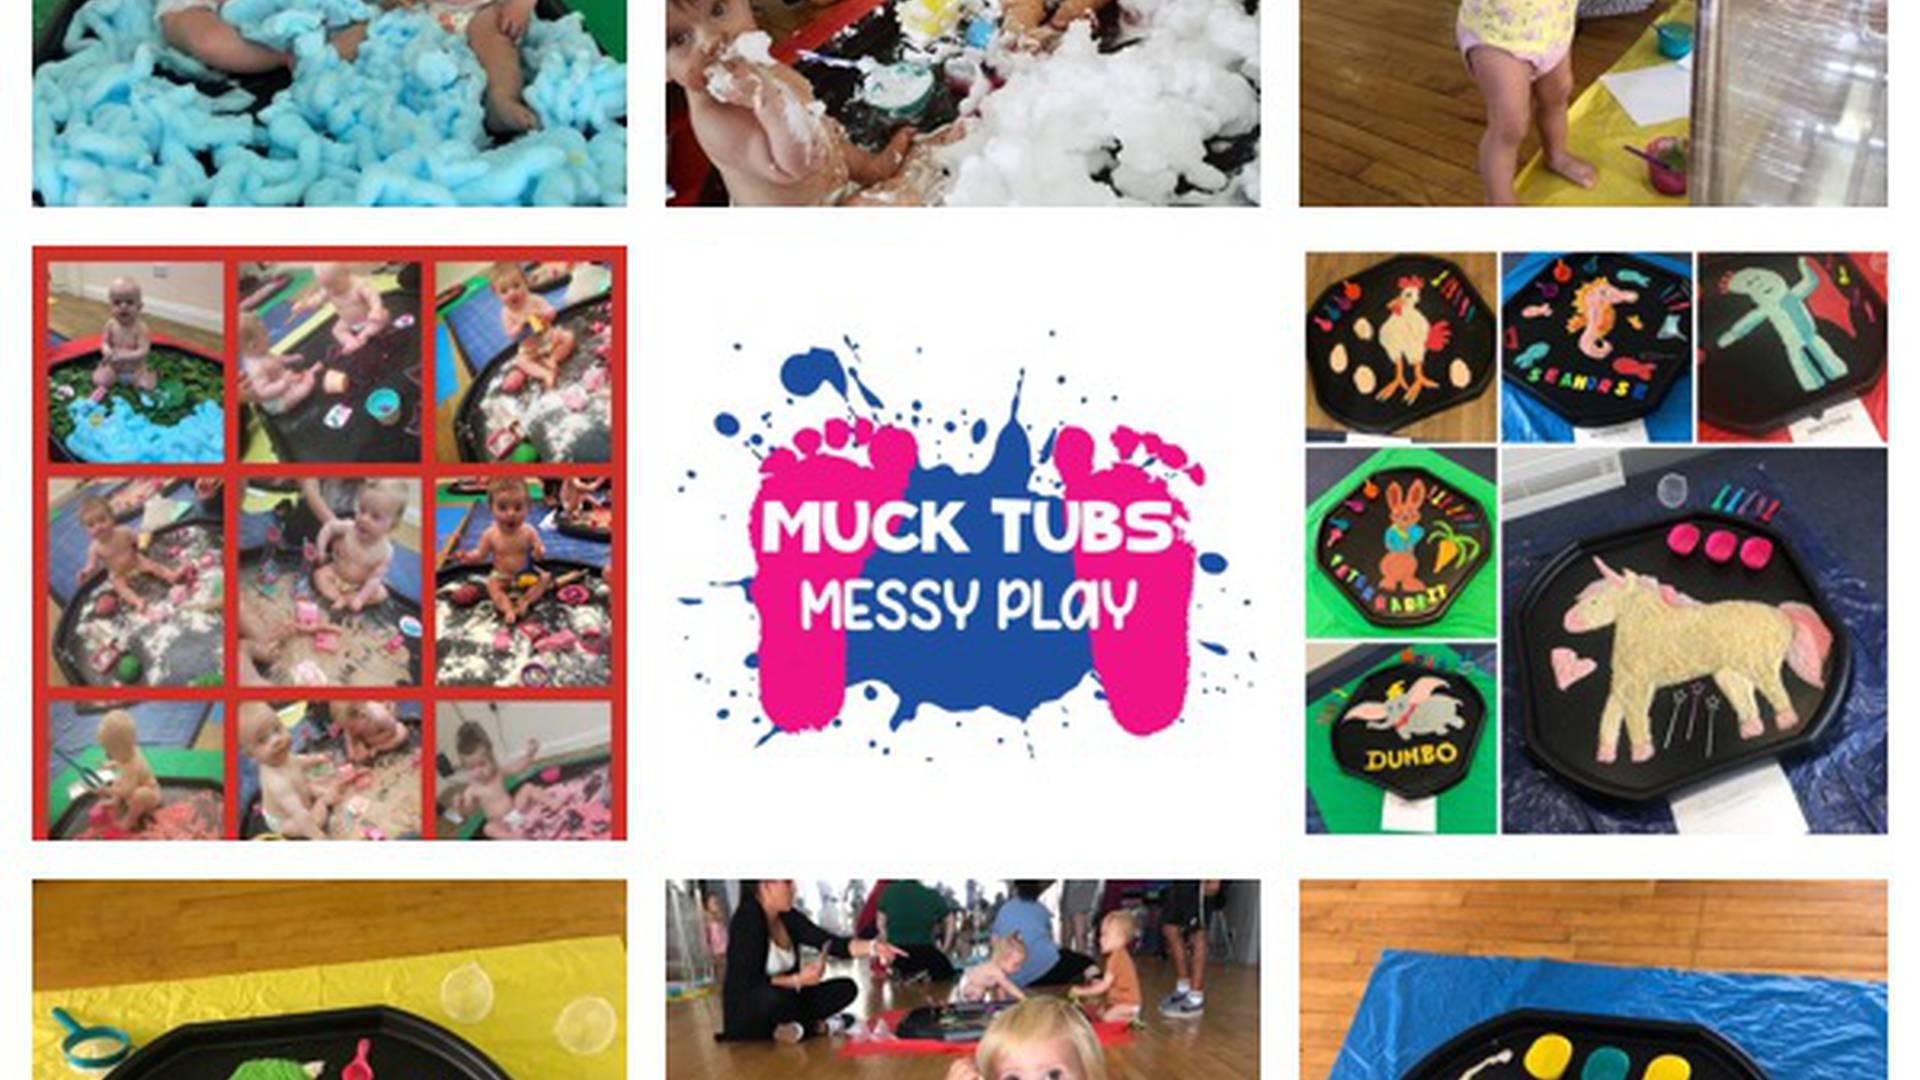 Muck Tubs Messy Play photo